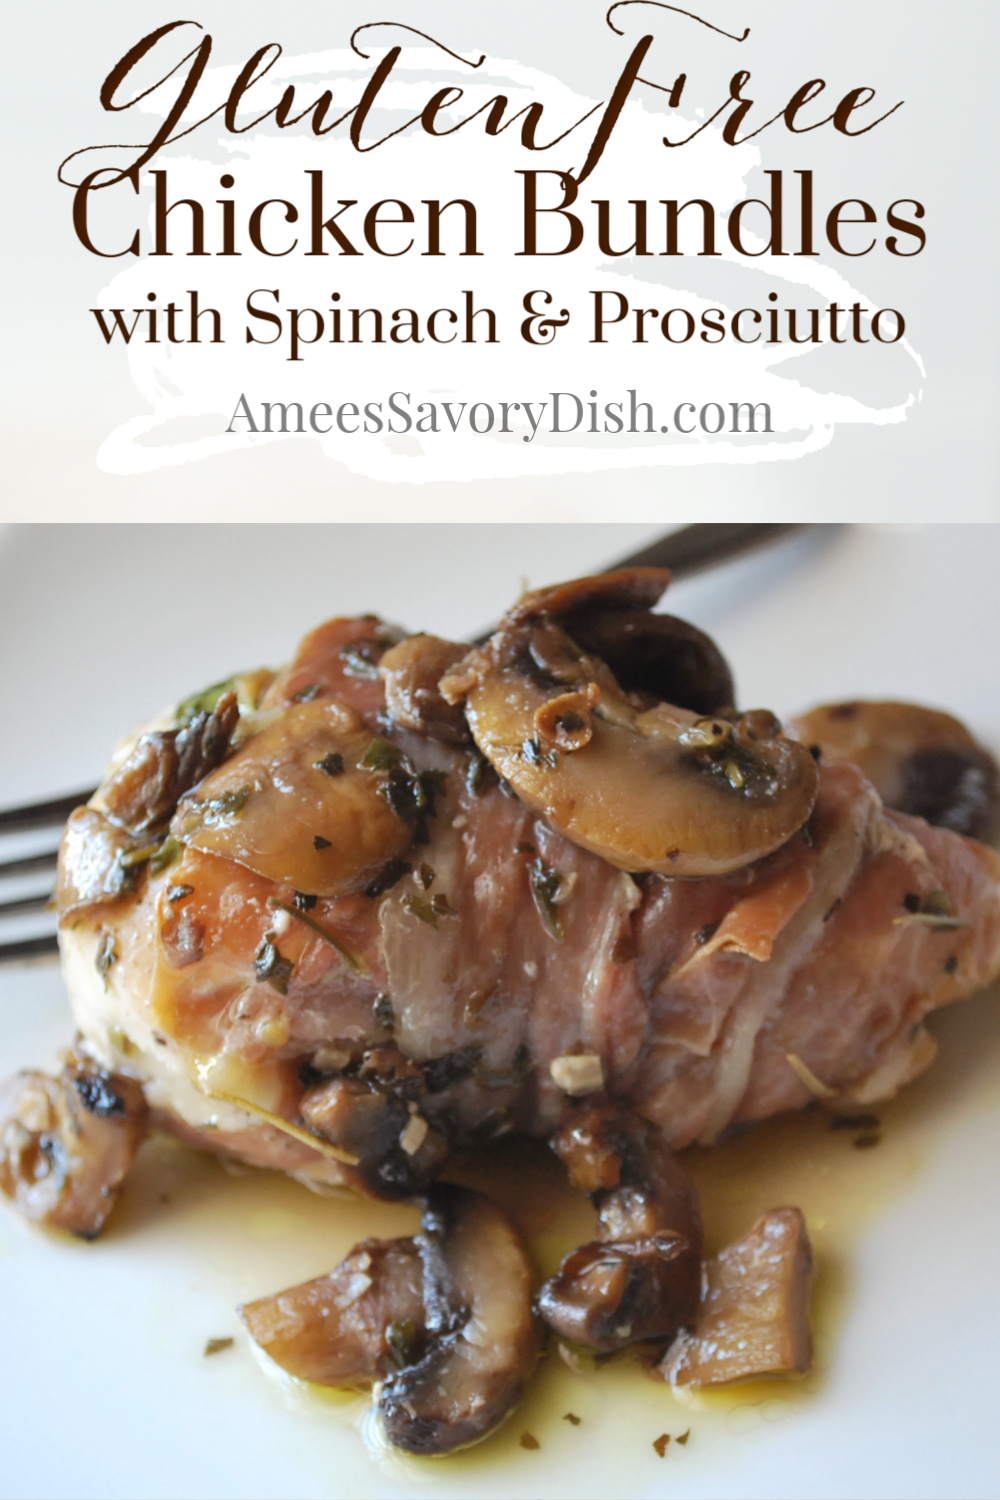 These delicious spinach & prosciutto chicken bundles made with fresh baby spinach, prosciutto ham, and mushrooms make a classy, yet simple gluten-free meal that the whole family will love. #chickenrecipe #glutenfreerecipe #chicken #chickenbundles via @Ameessavorydish